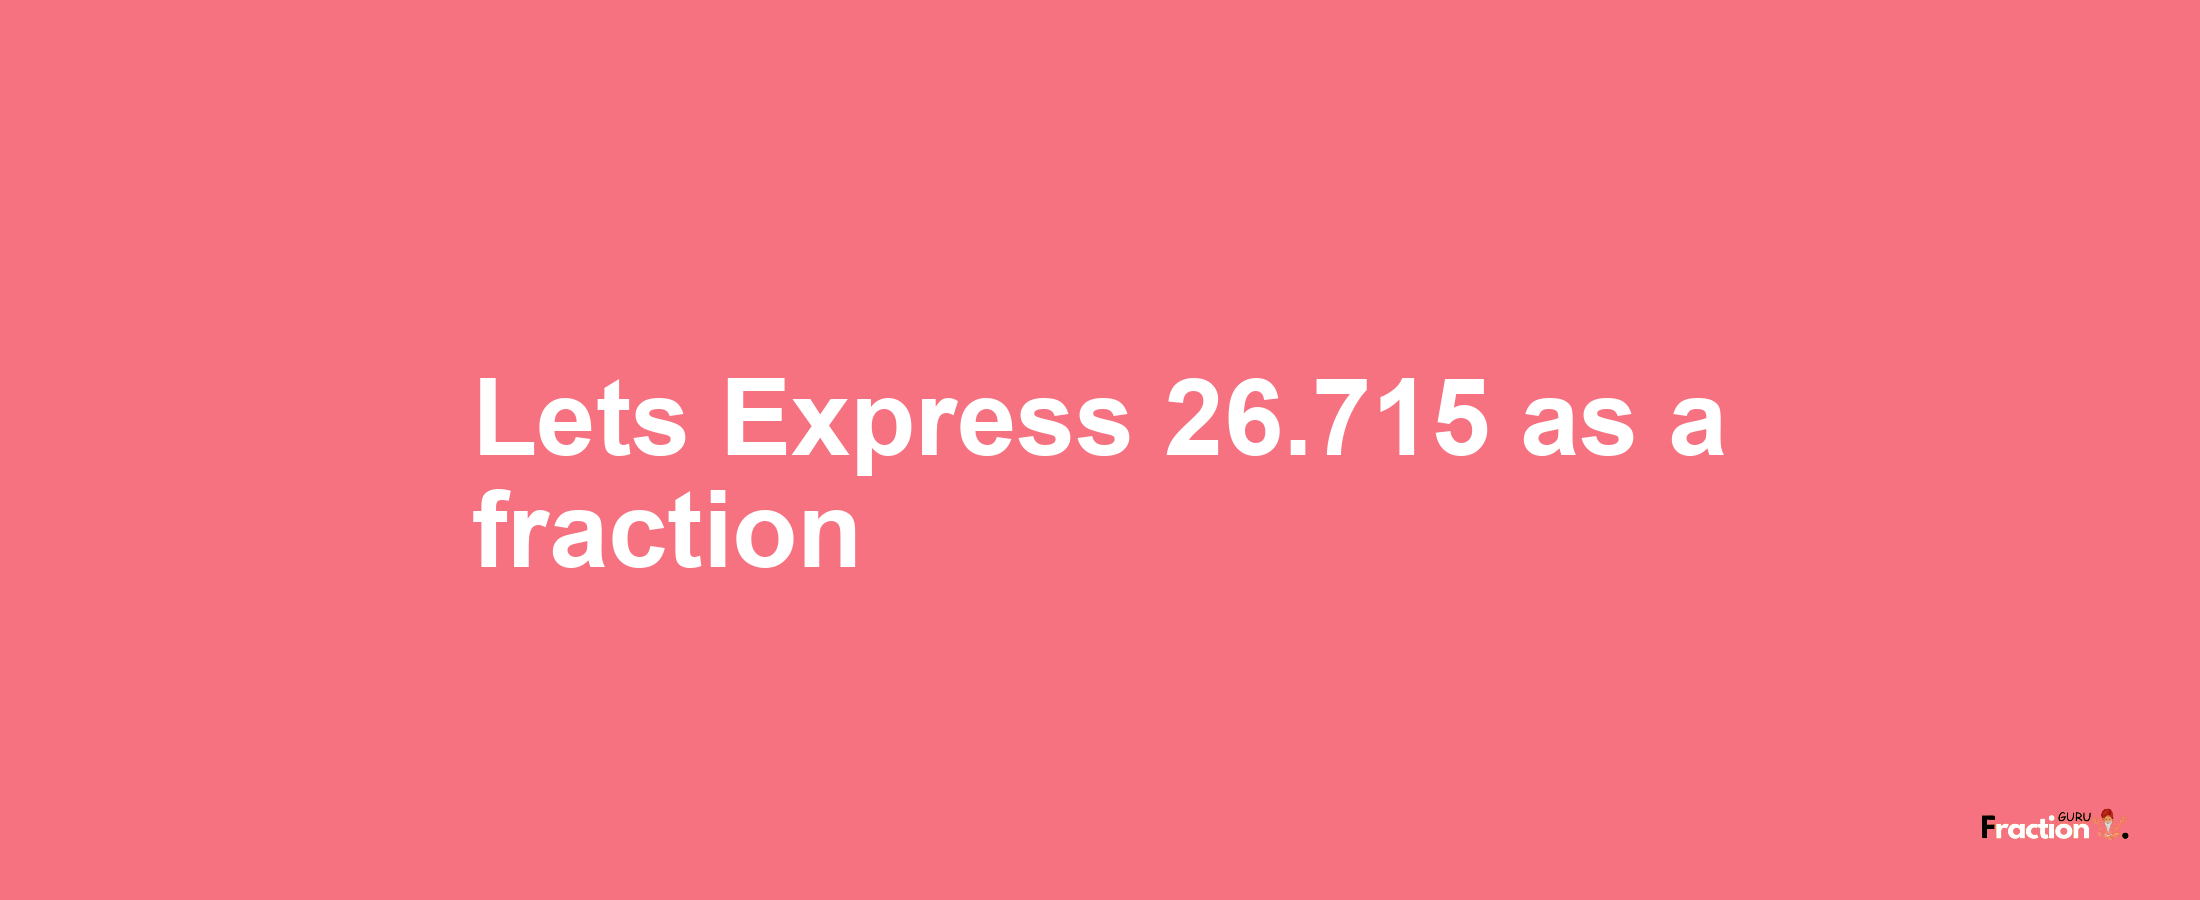 Lets Express 26.715 as afraction